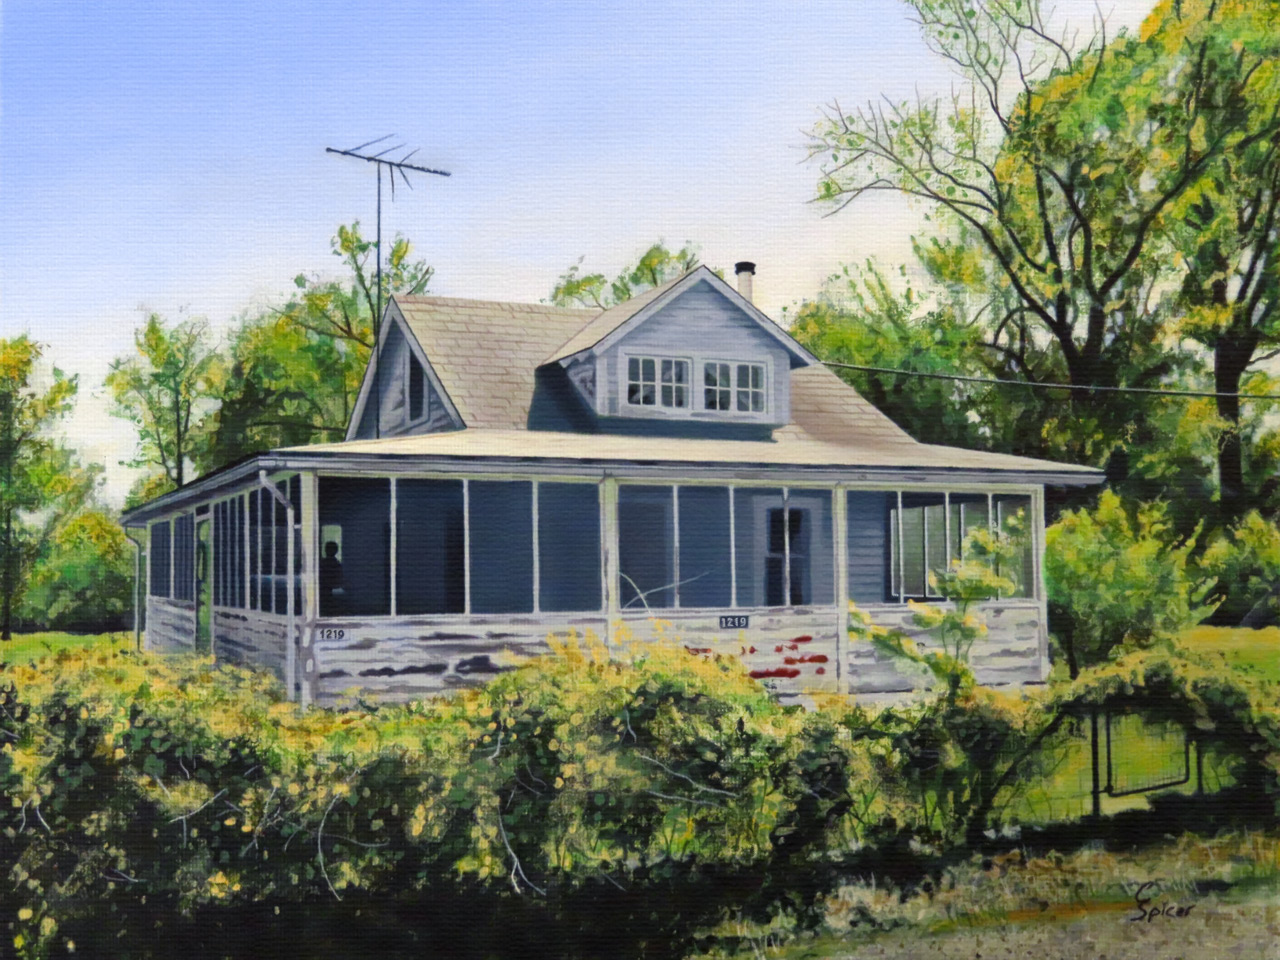 Cottage on Holly Ave - Painting by Christopher Spicer